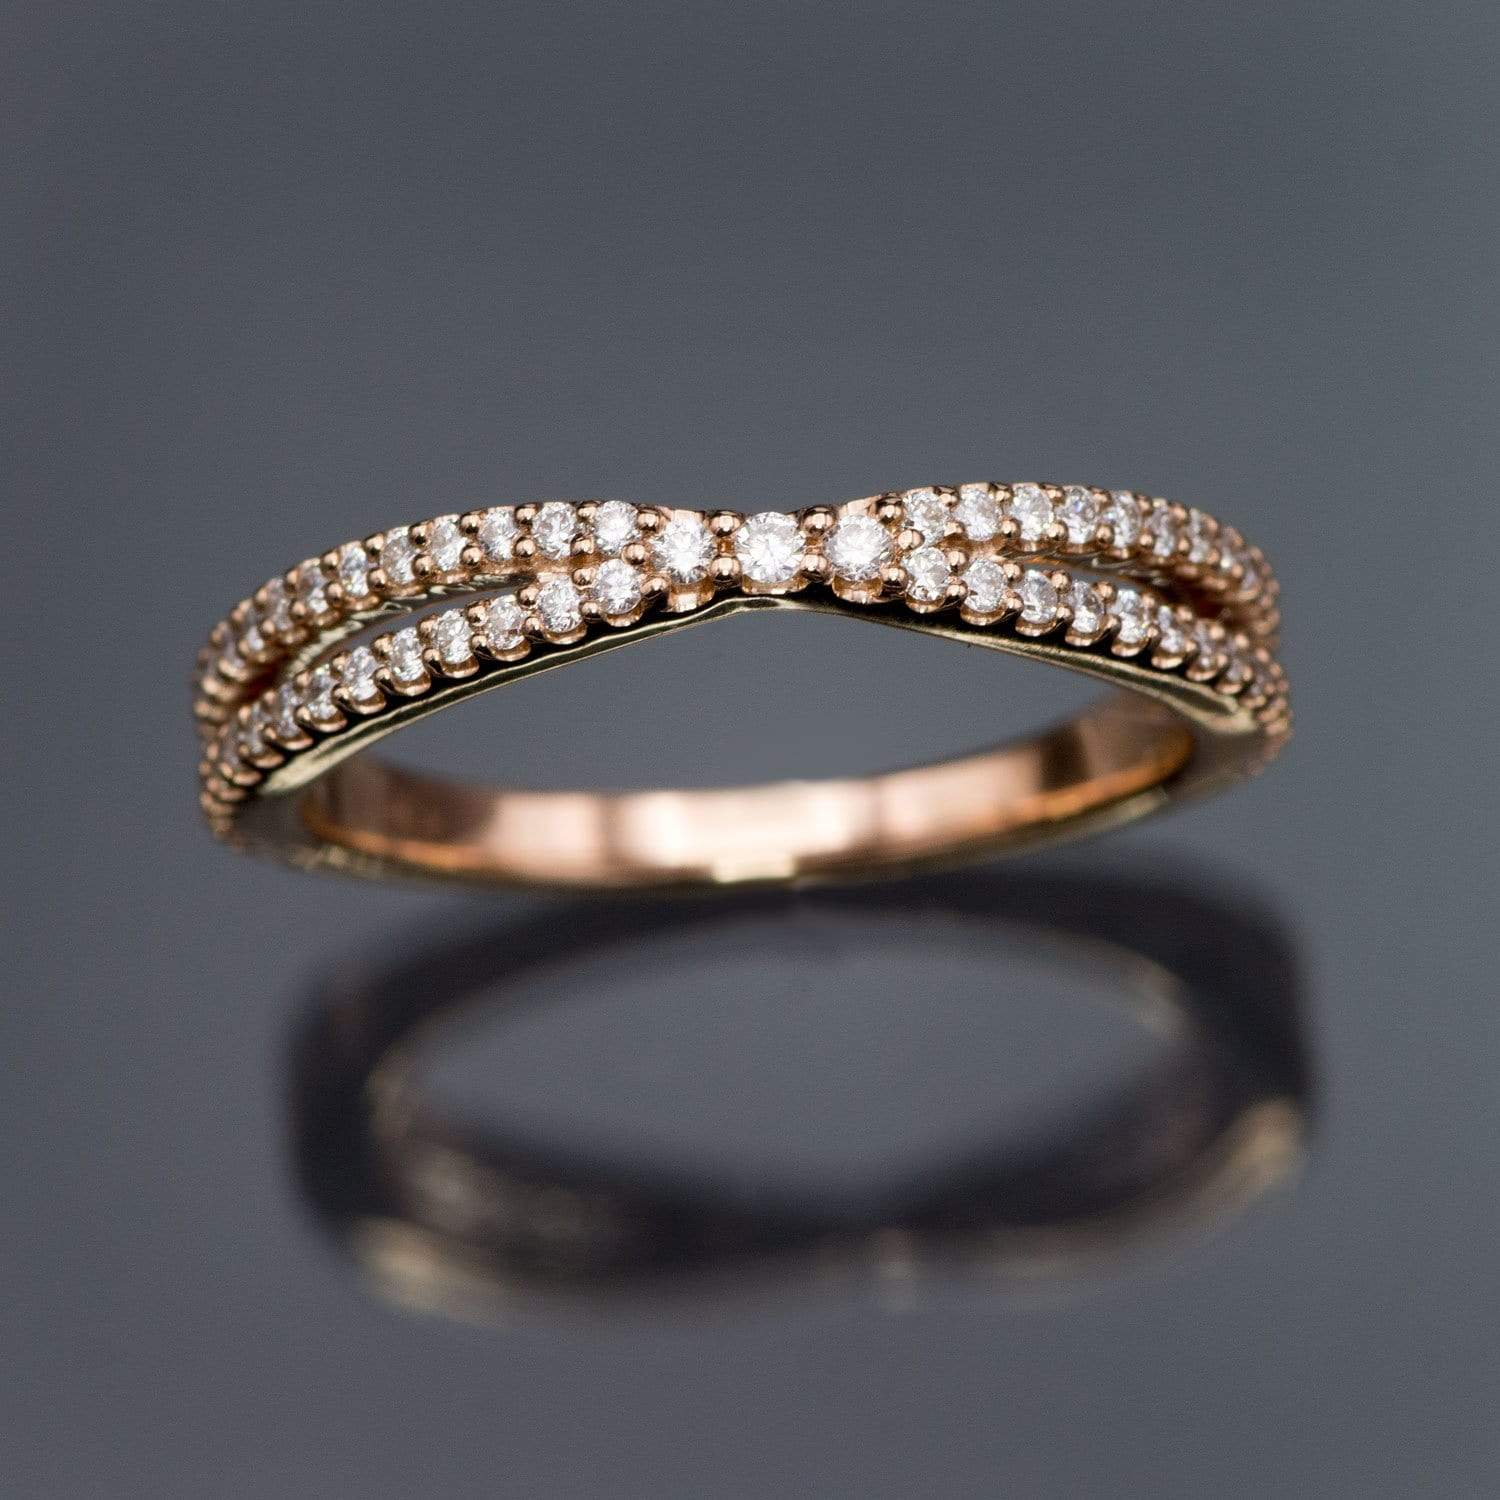 Chrissy Band - Contoured Split Shank Stacking Wedding Ring with Diamonds, Moissanites, Rubies or Sapphires Ring by Nodeform